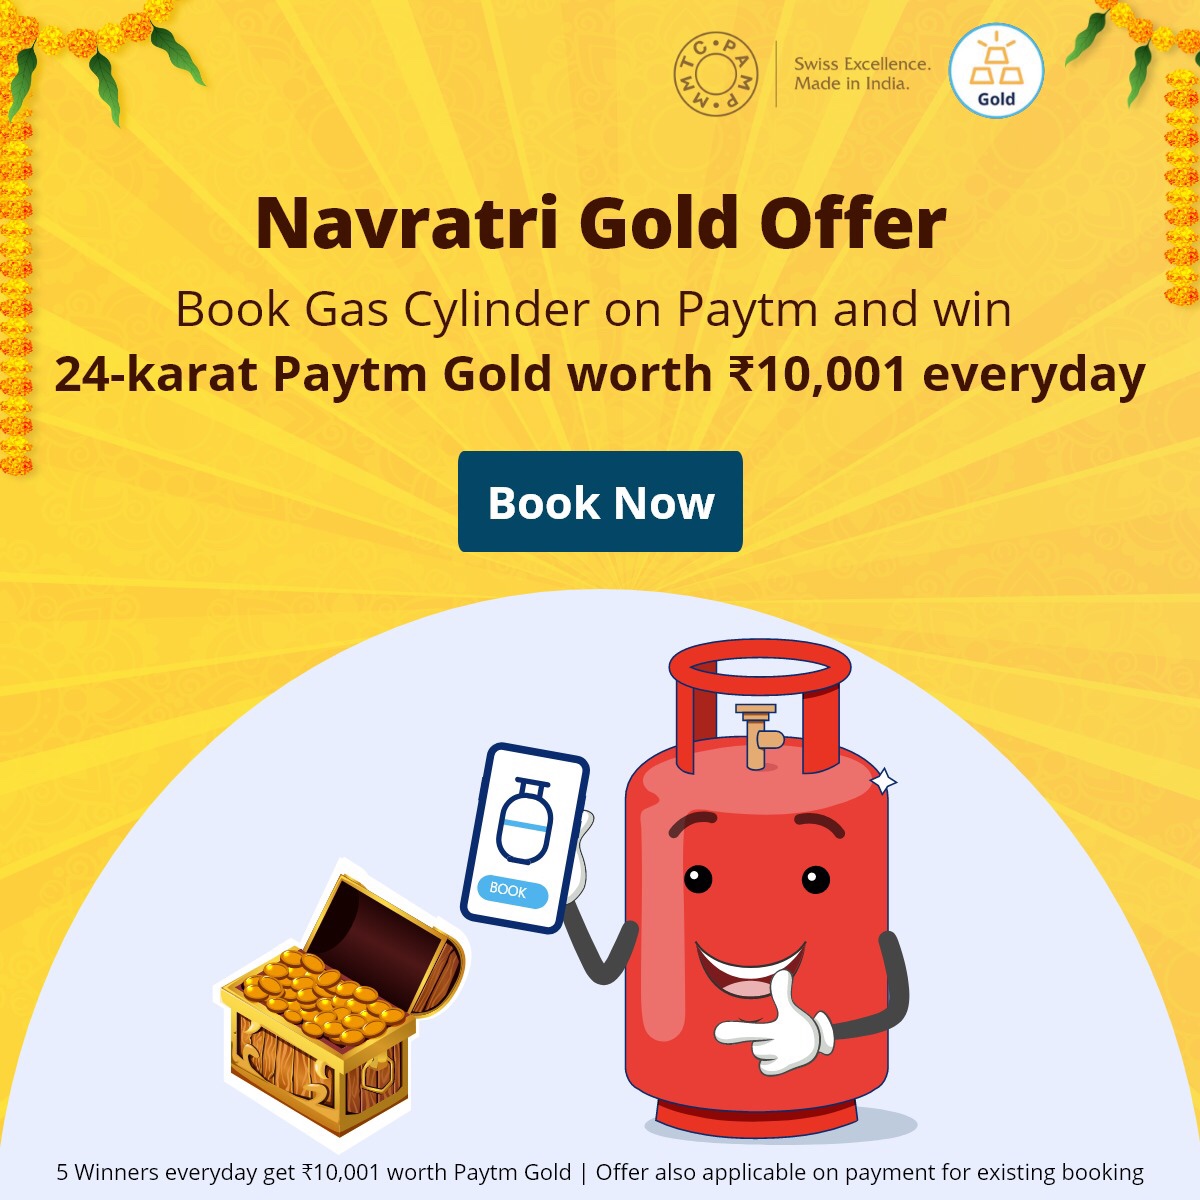 Time to win Gold!!
Book your #Bharatgas refill cylinders thru #Paytm  and win #24caratGold @BPCLimited @Paytm @BPCLPatna